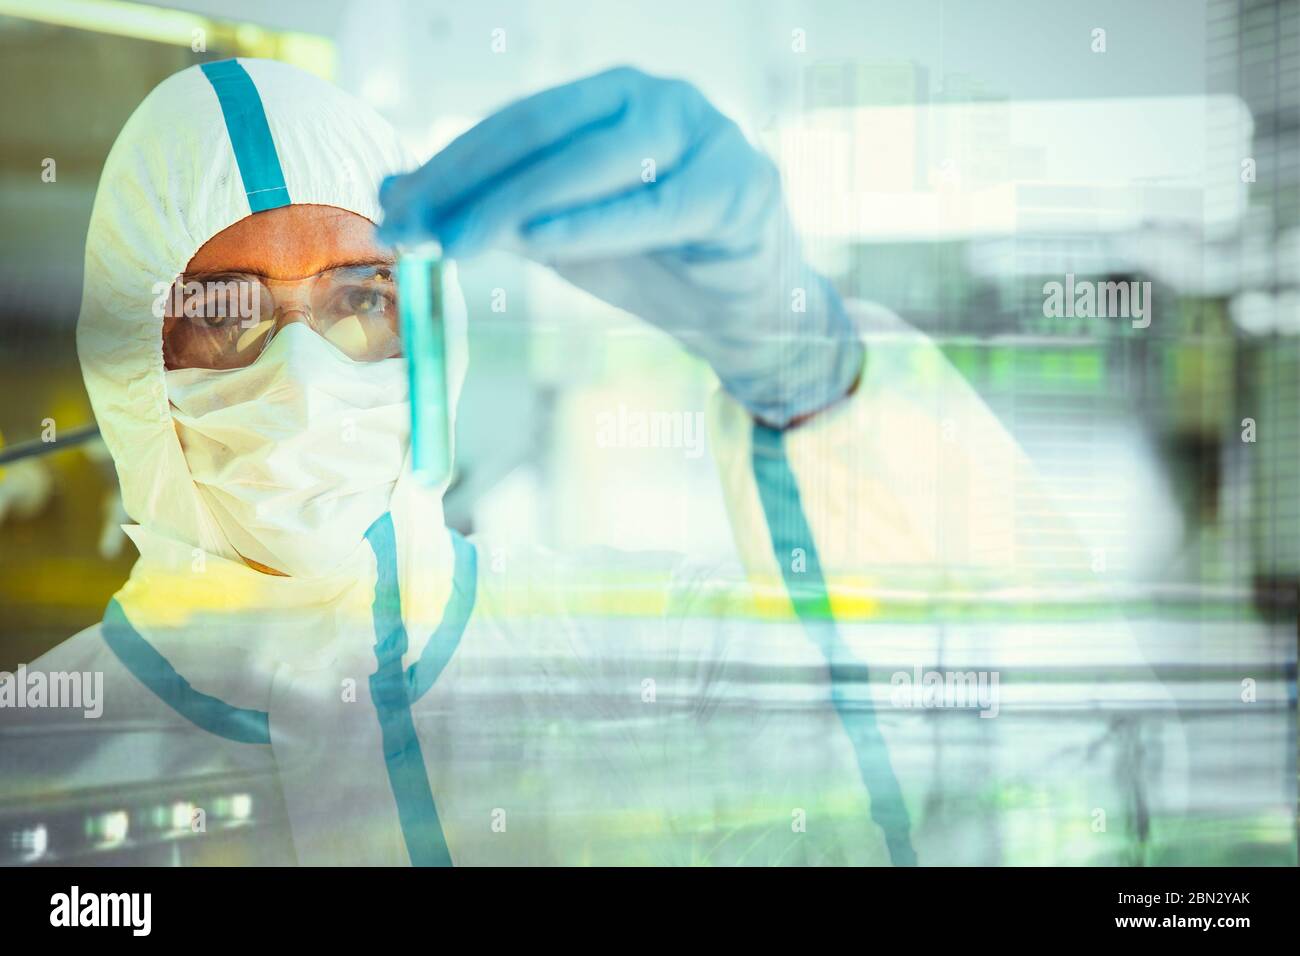 Male scientist in clean suit studying vial in laboratory Stock Photo